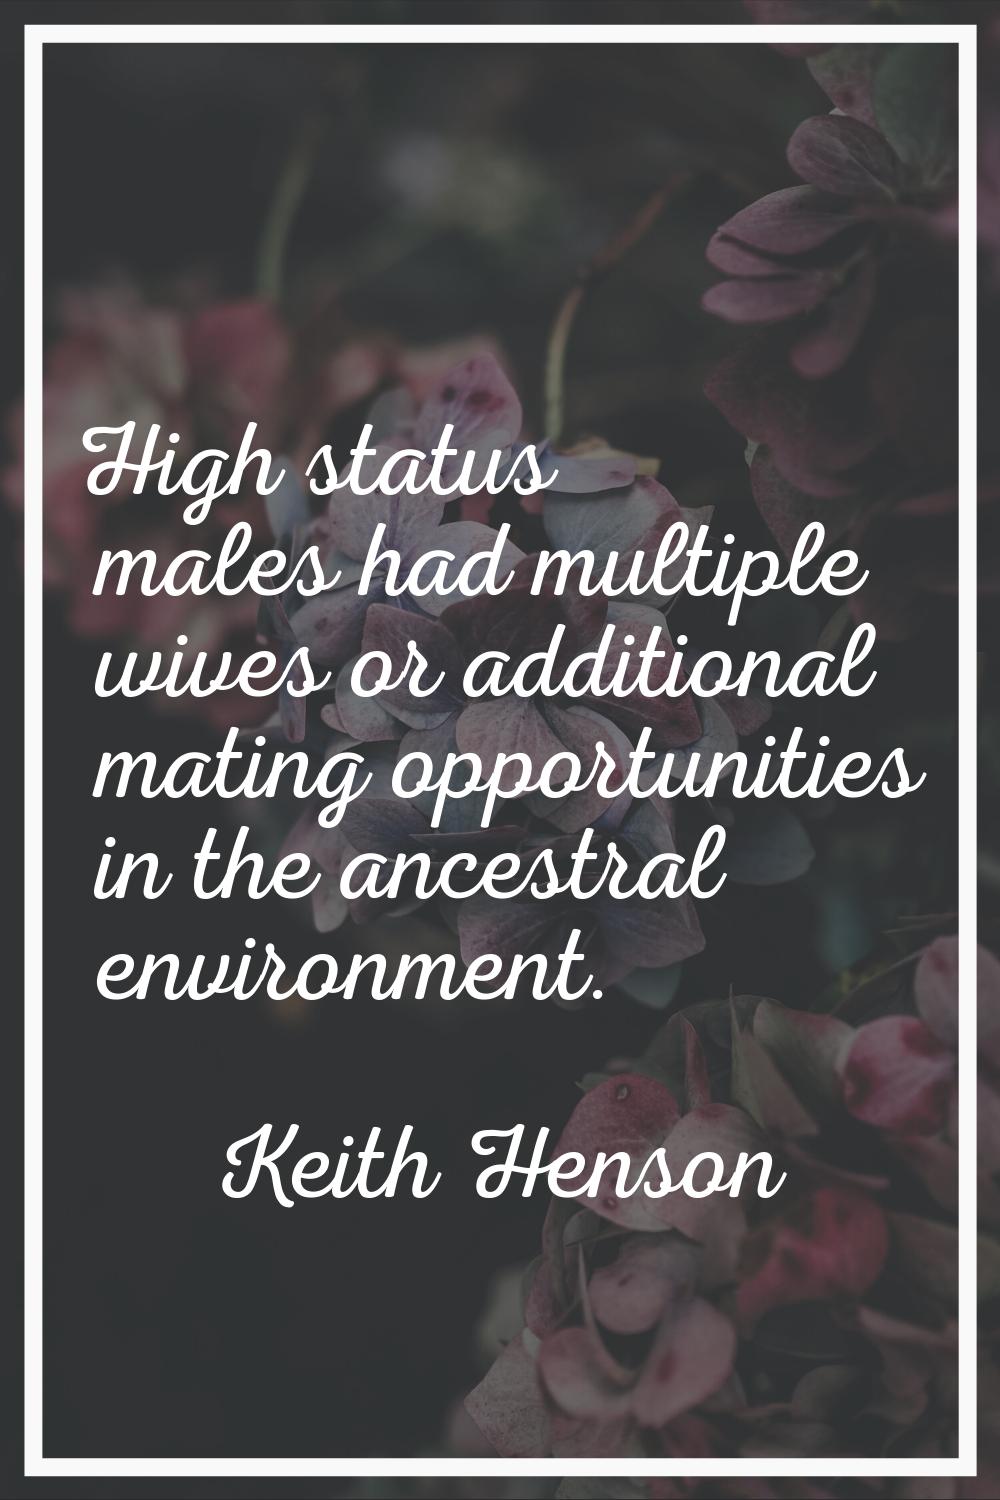 High status males had multiple wives or additional mating opportunities in the ancestral environmen